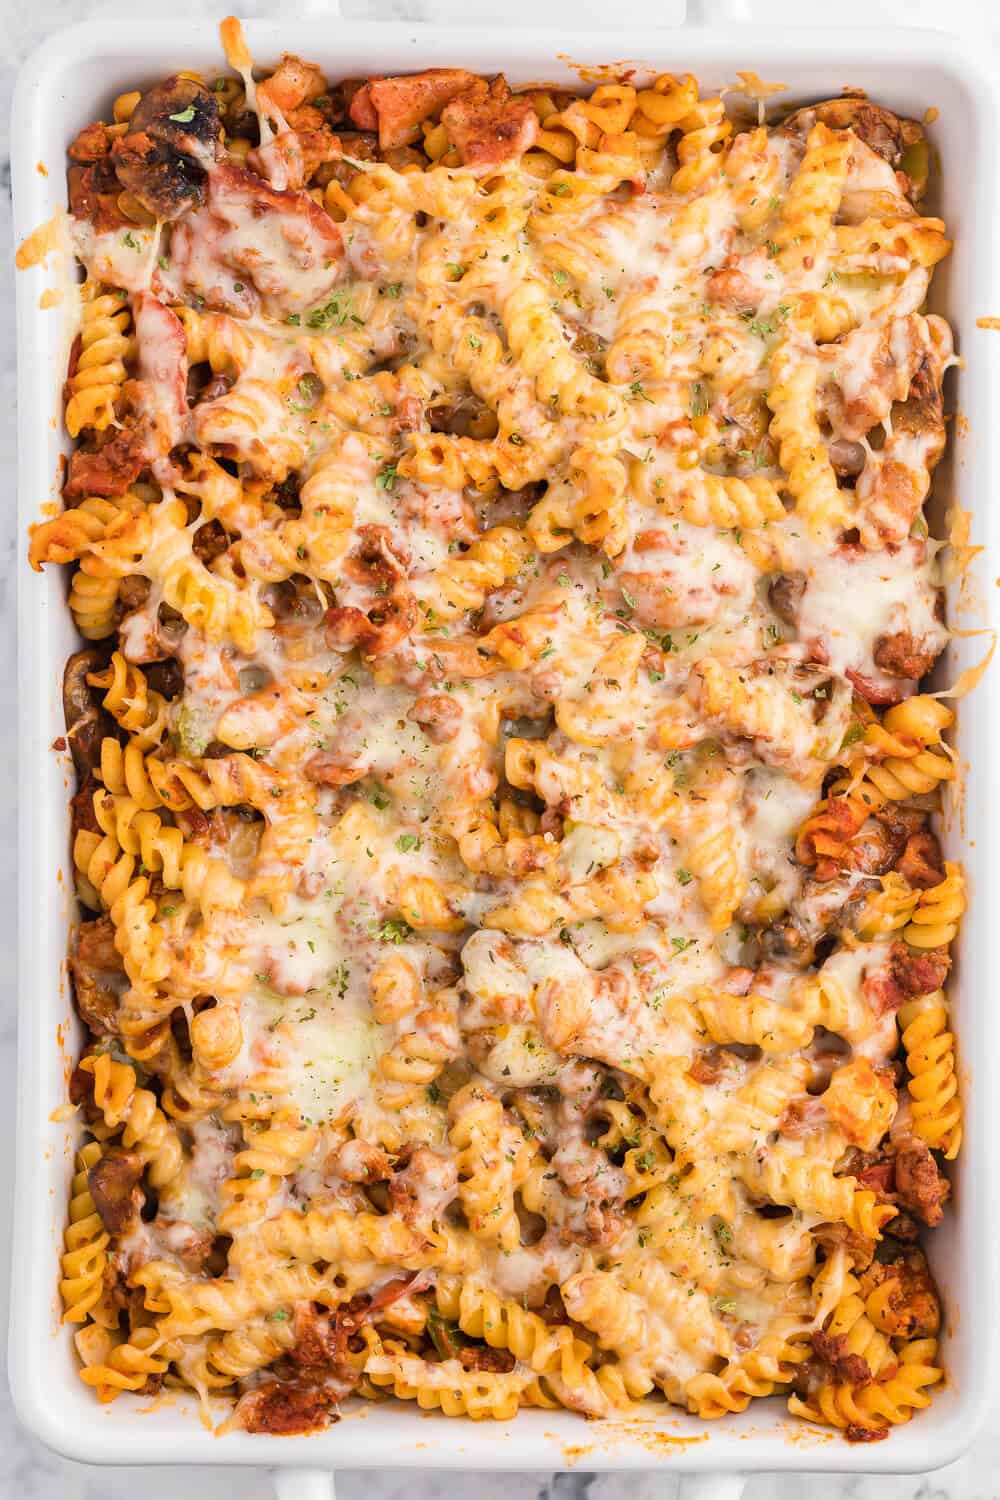 Meatzza Casserole - This crowd pleasing casserole recipe is packed with four kinds of meat, pizza sauce, veggies and oohey gooey cheese!